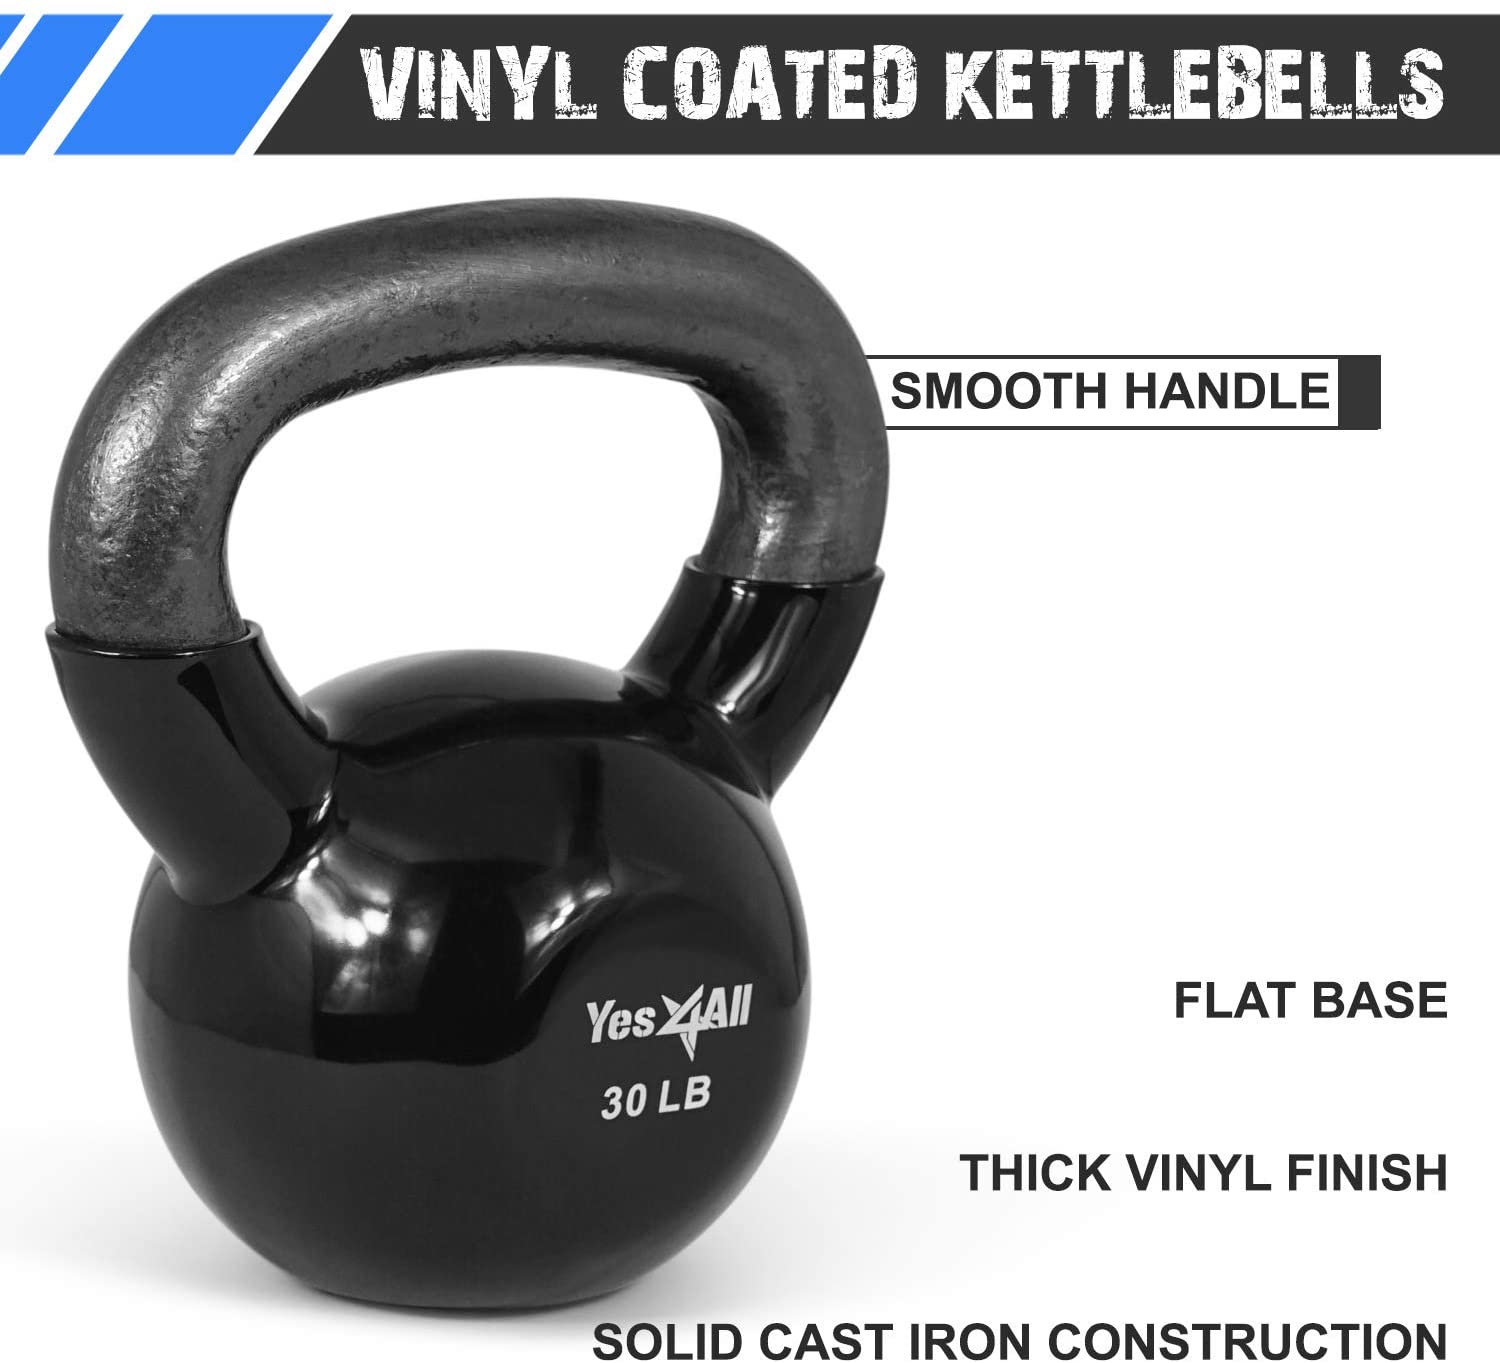 Yes4All 45 lb Vinyl Coated / PVC Kettlebell, Black, Combo / Set, Includes 20-25lb - image 5 of 8